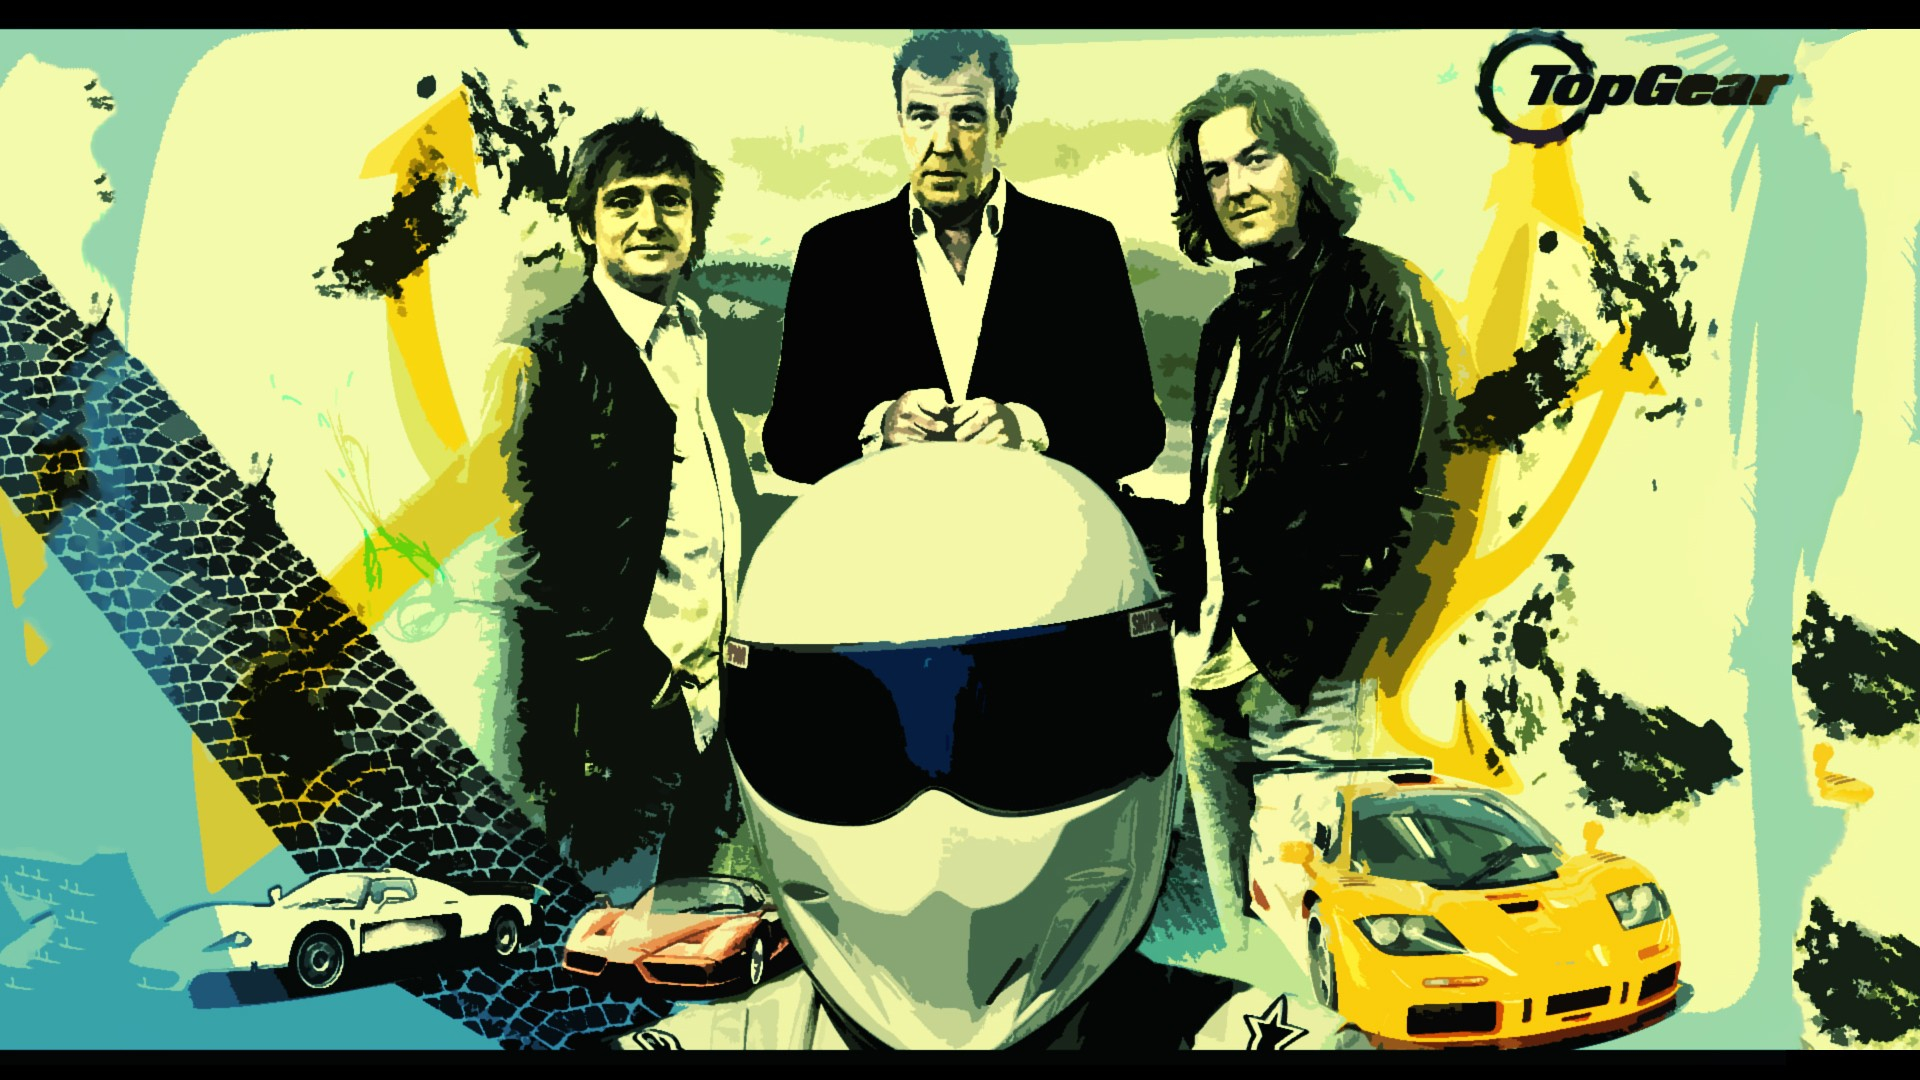 1920x1080 Wallpaper : illustration, anime, cartoon, comics, poster, Top Gear, Jeremy Clarkson, The Stig, James May, Richard Hammond, Captain Slow, px, album cover, comic book CoolWallpapers 543984 HD Wallpapers